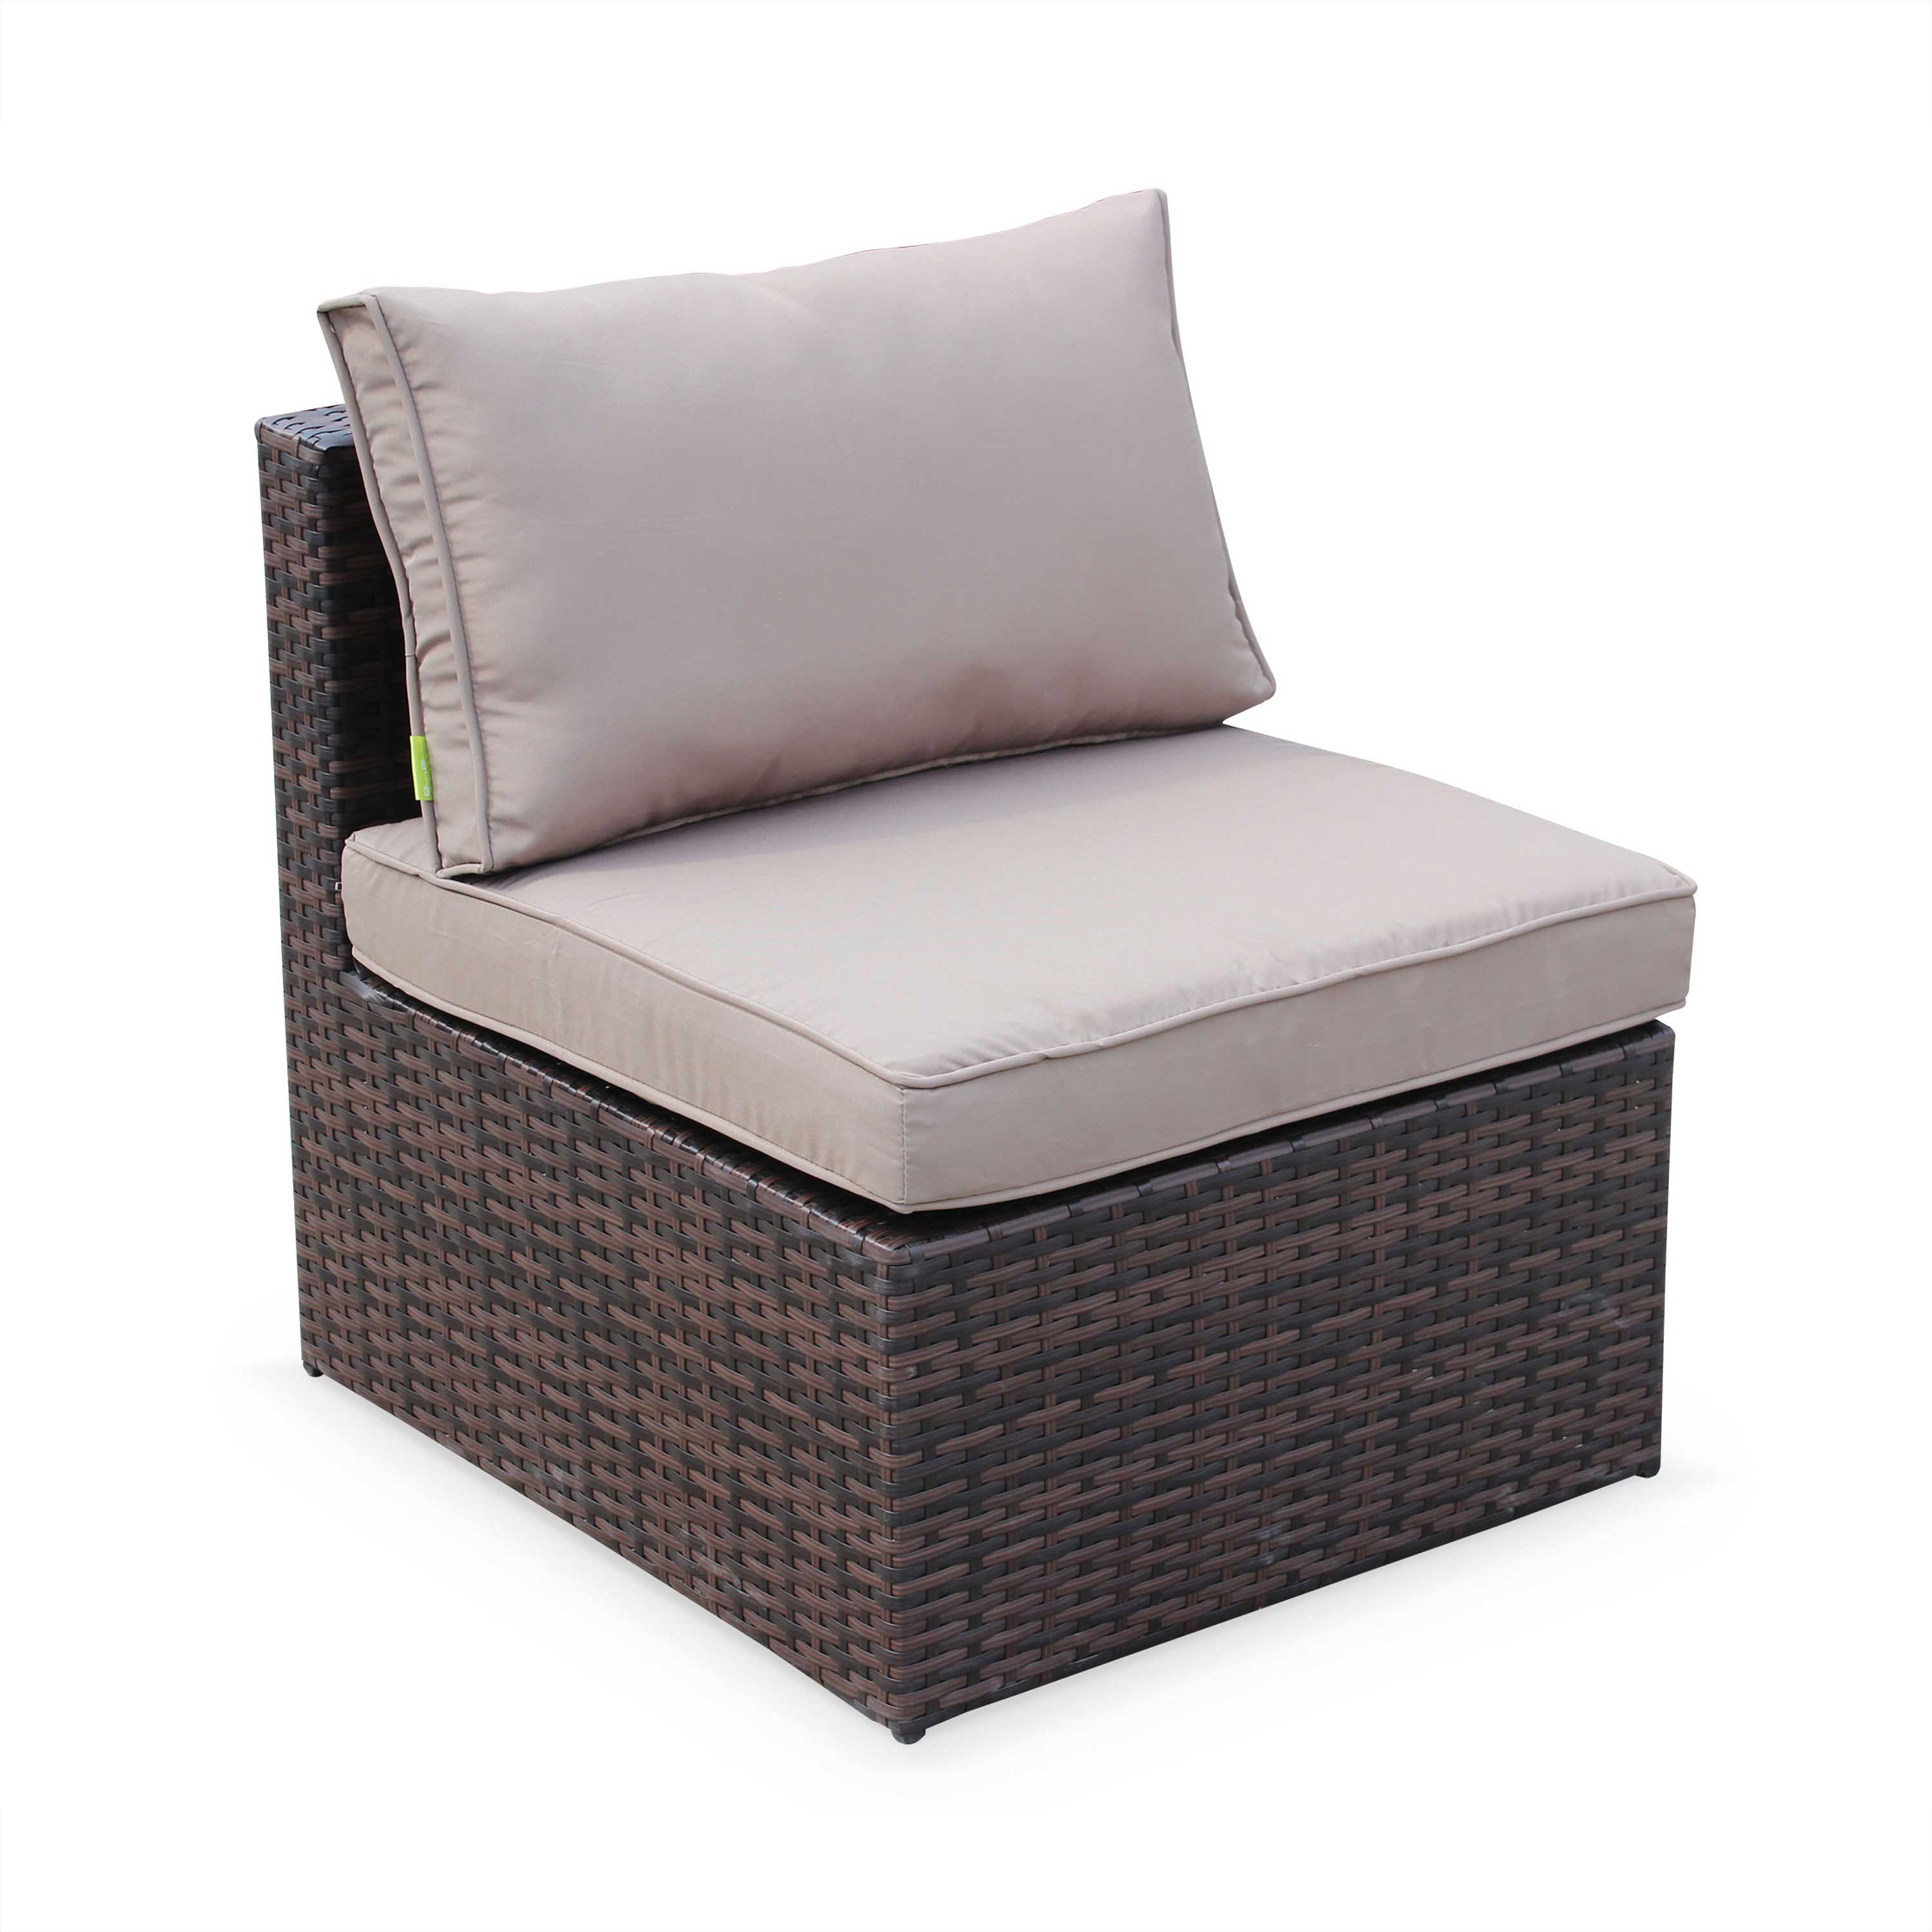 Middle sofa BENITO, SIENA 5 seater outdoor lounge Brown/Brown